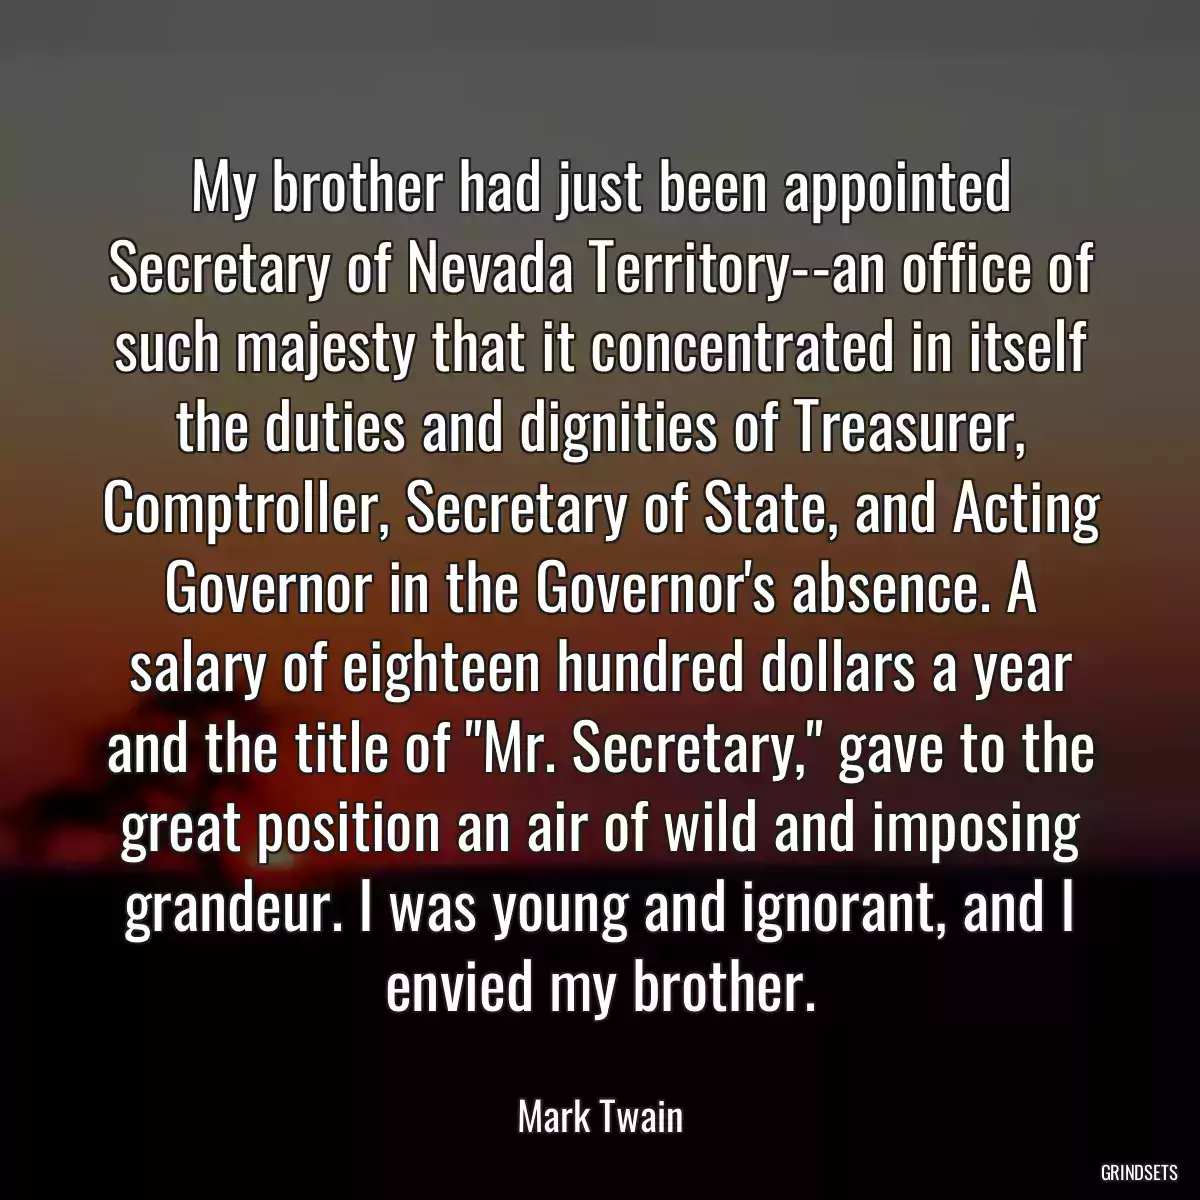 My brother had just been appointed Secretary of Nevada Territory--an office of such majesty that it concentrated in itself the duties and dignities of Treasurer, Comptroller, Secretary of State, and Acting Governor in the Governor\'s absence. A salary of eighteen hundred dollars a year and the title of \